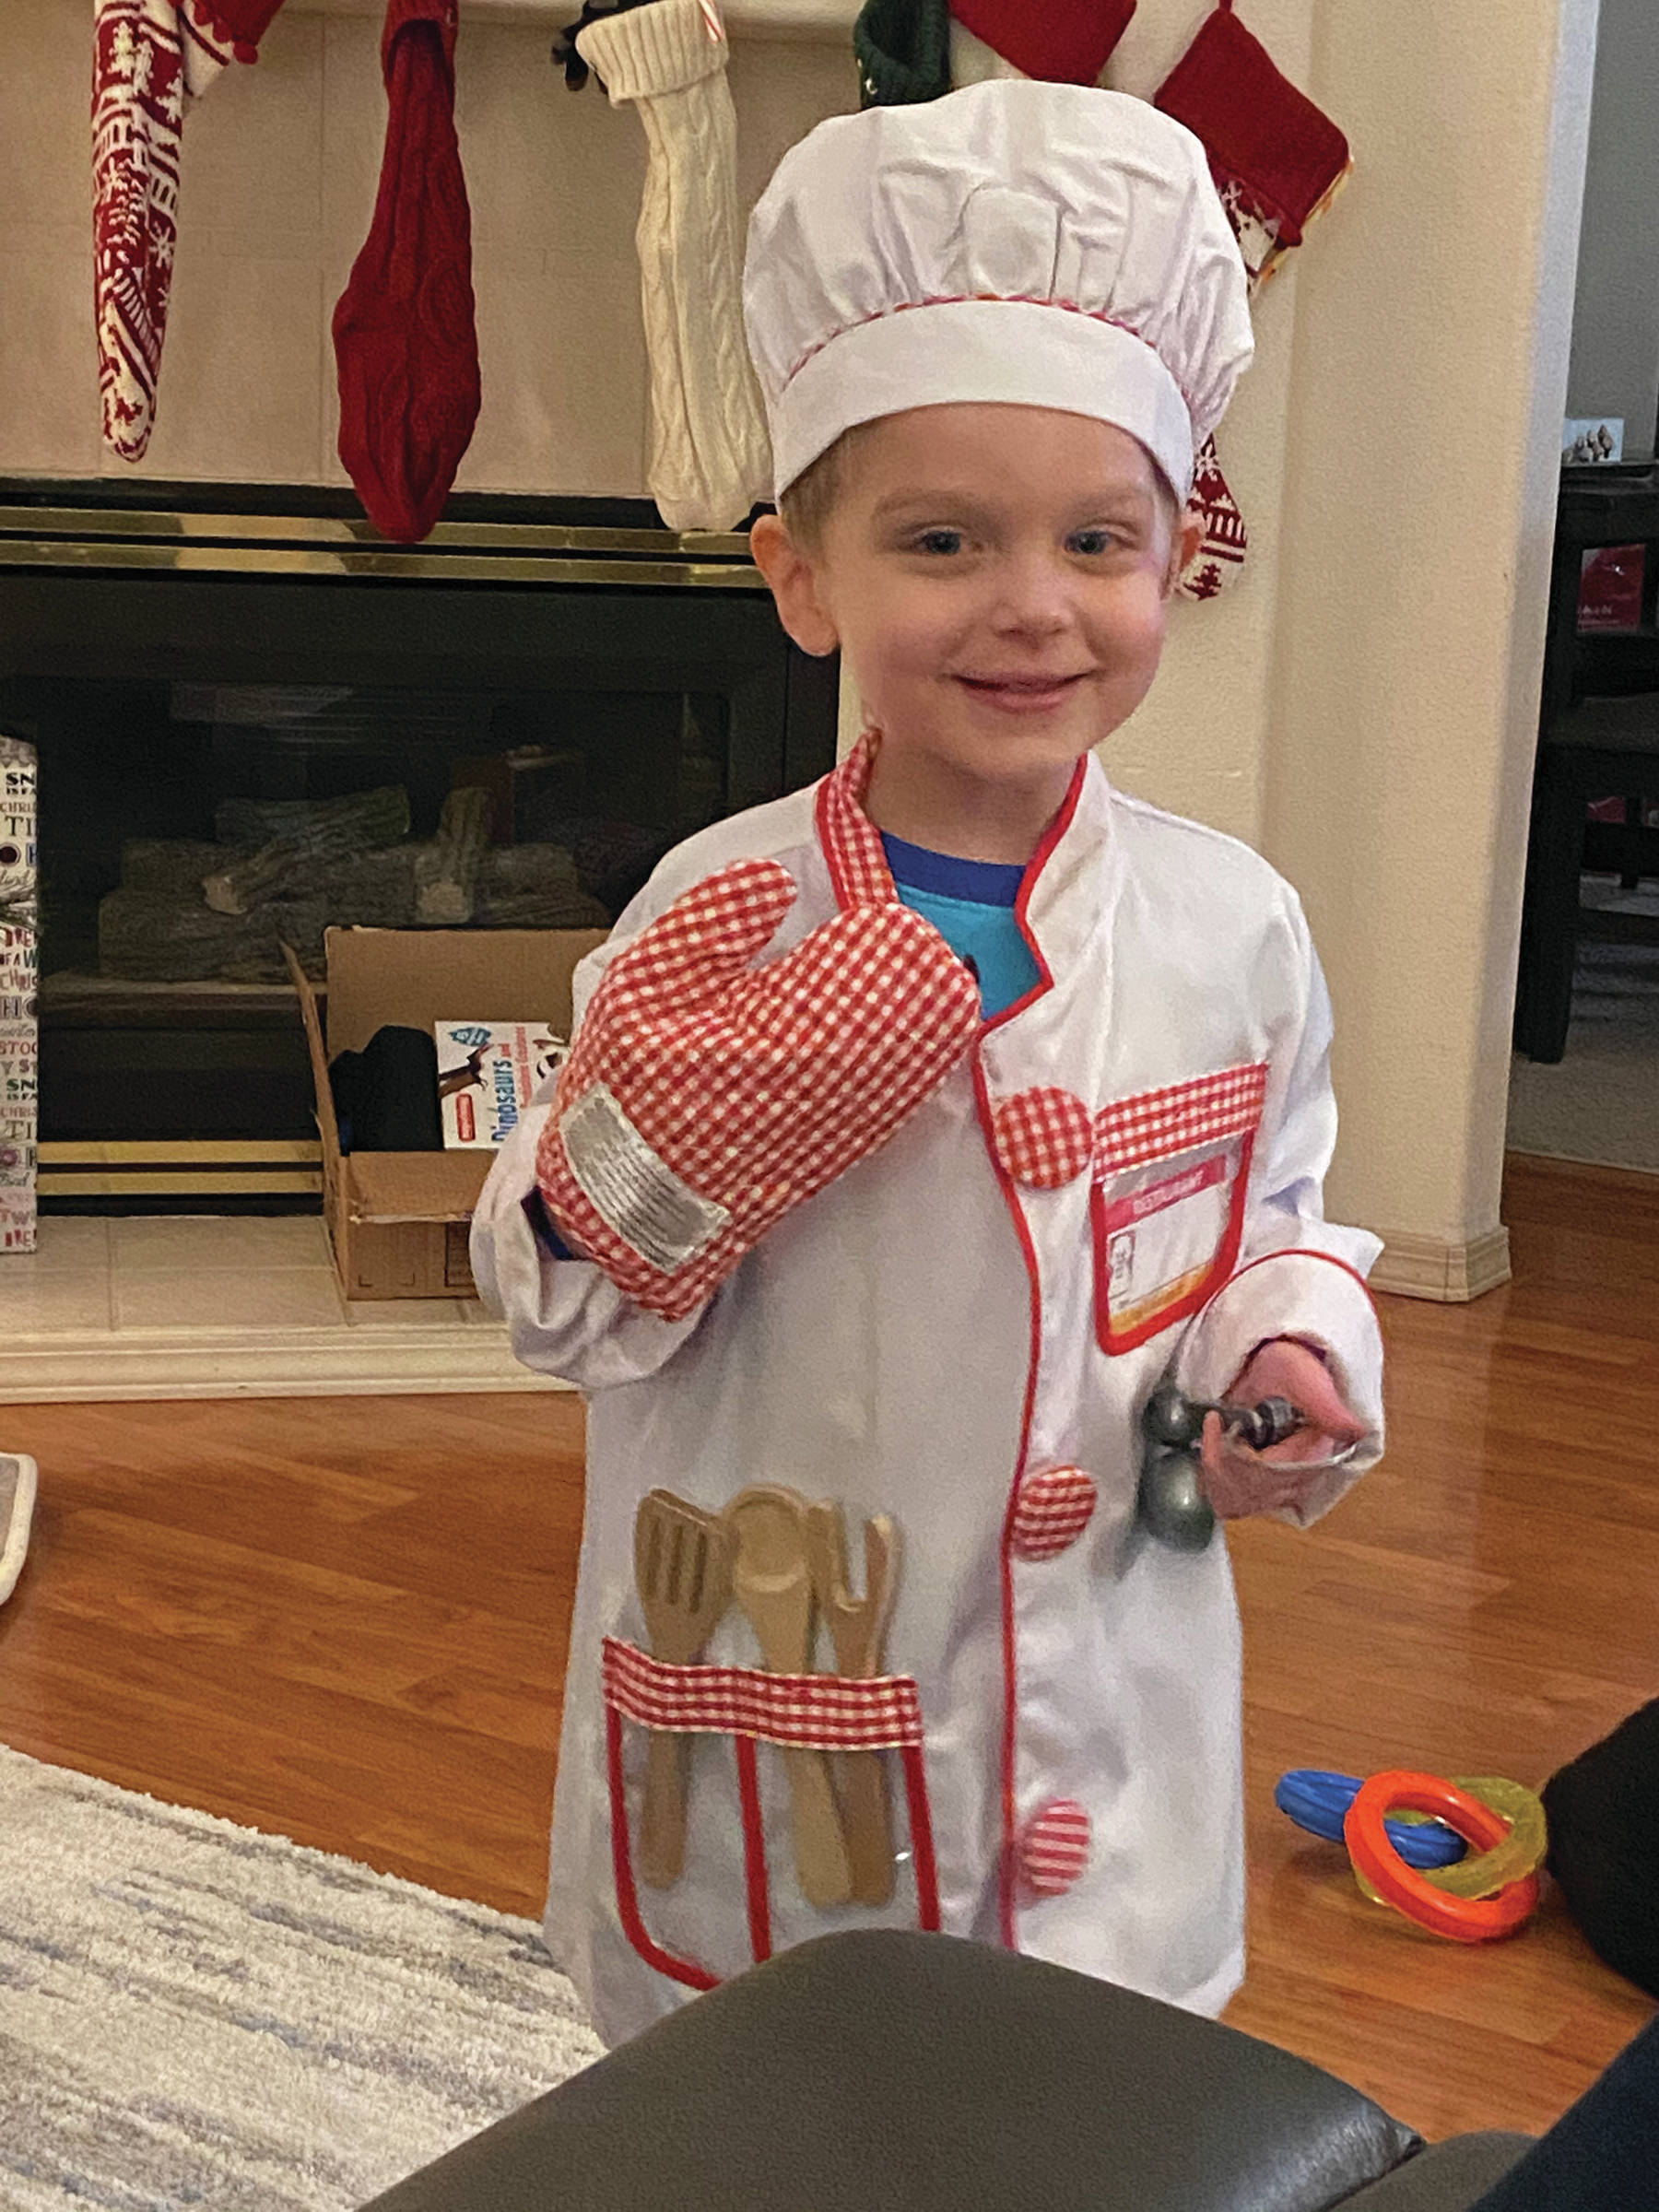 Teri Robl’s grandson, Kase, is ready to help his grandmother in the kitchen, as seen here on Dec. 25, 2019, at her Homer, Alaska, home. (Photo by Teri Robl)